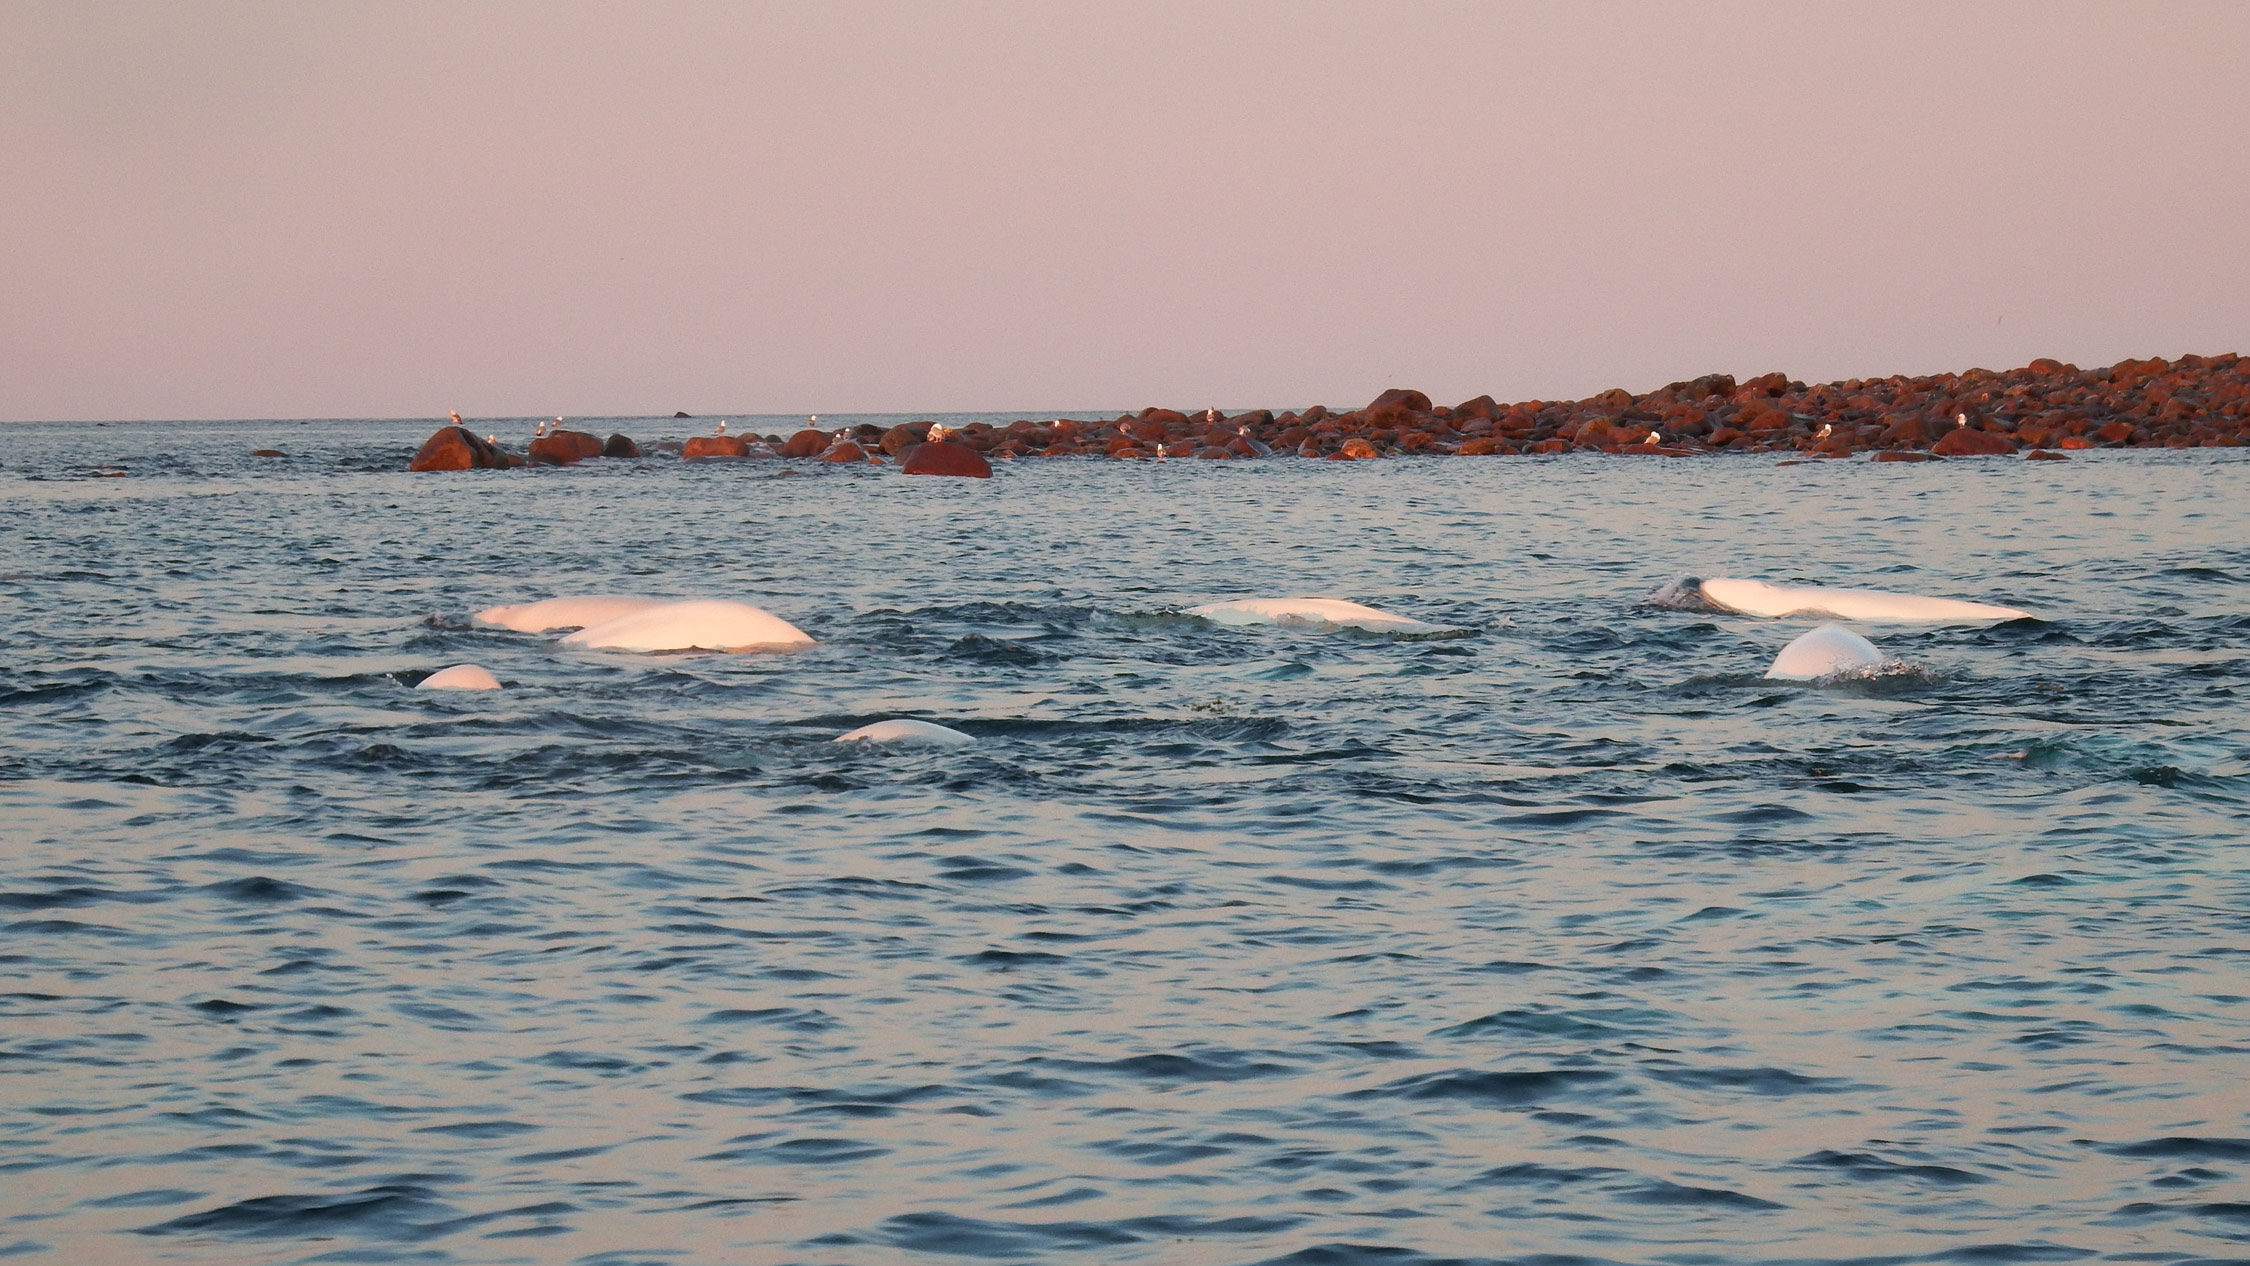 Beluga whales off Hubbard Point.